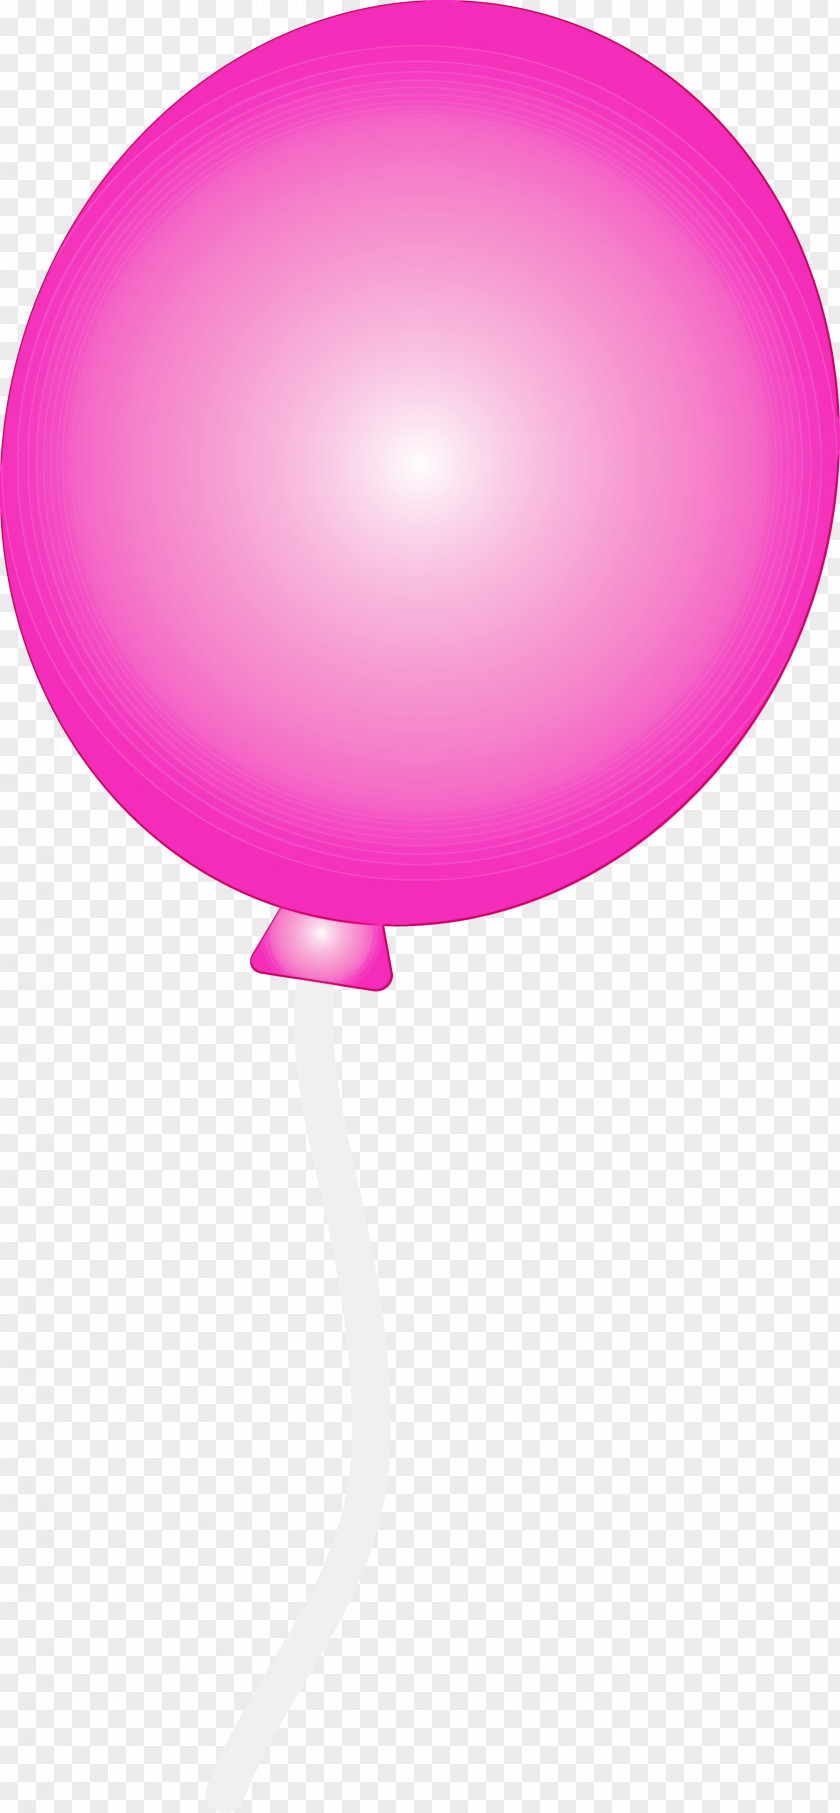 Balloon Pink Magenta Party Supply Material Property PNG